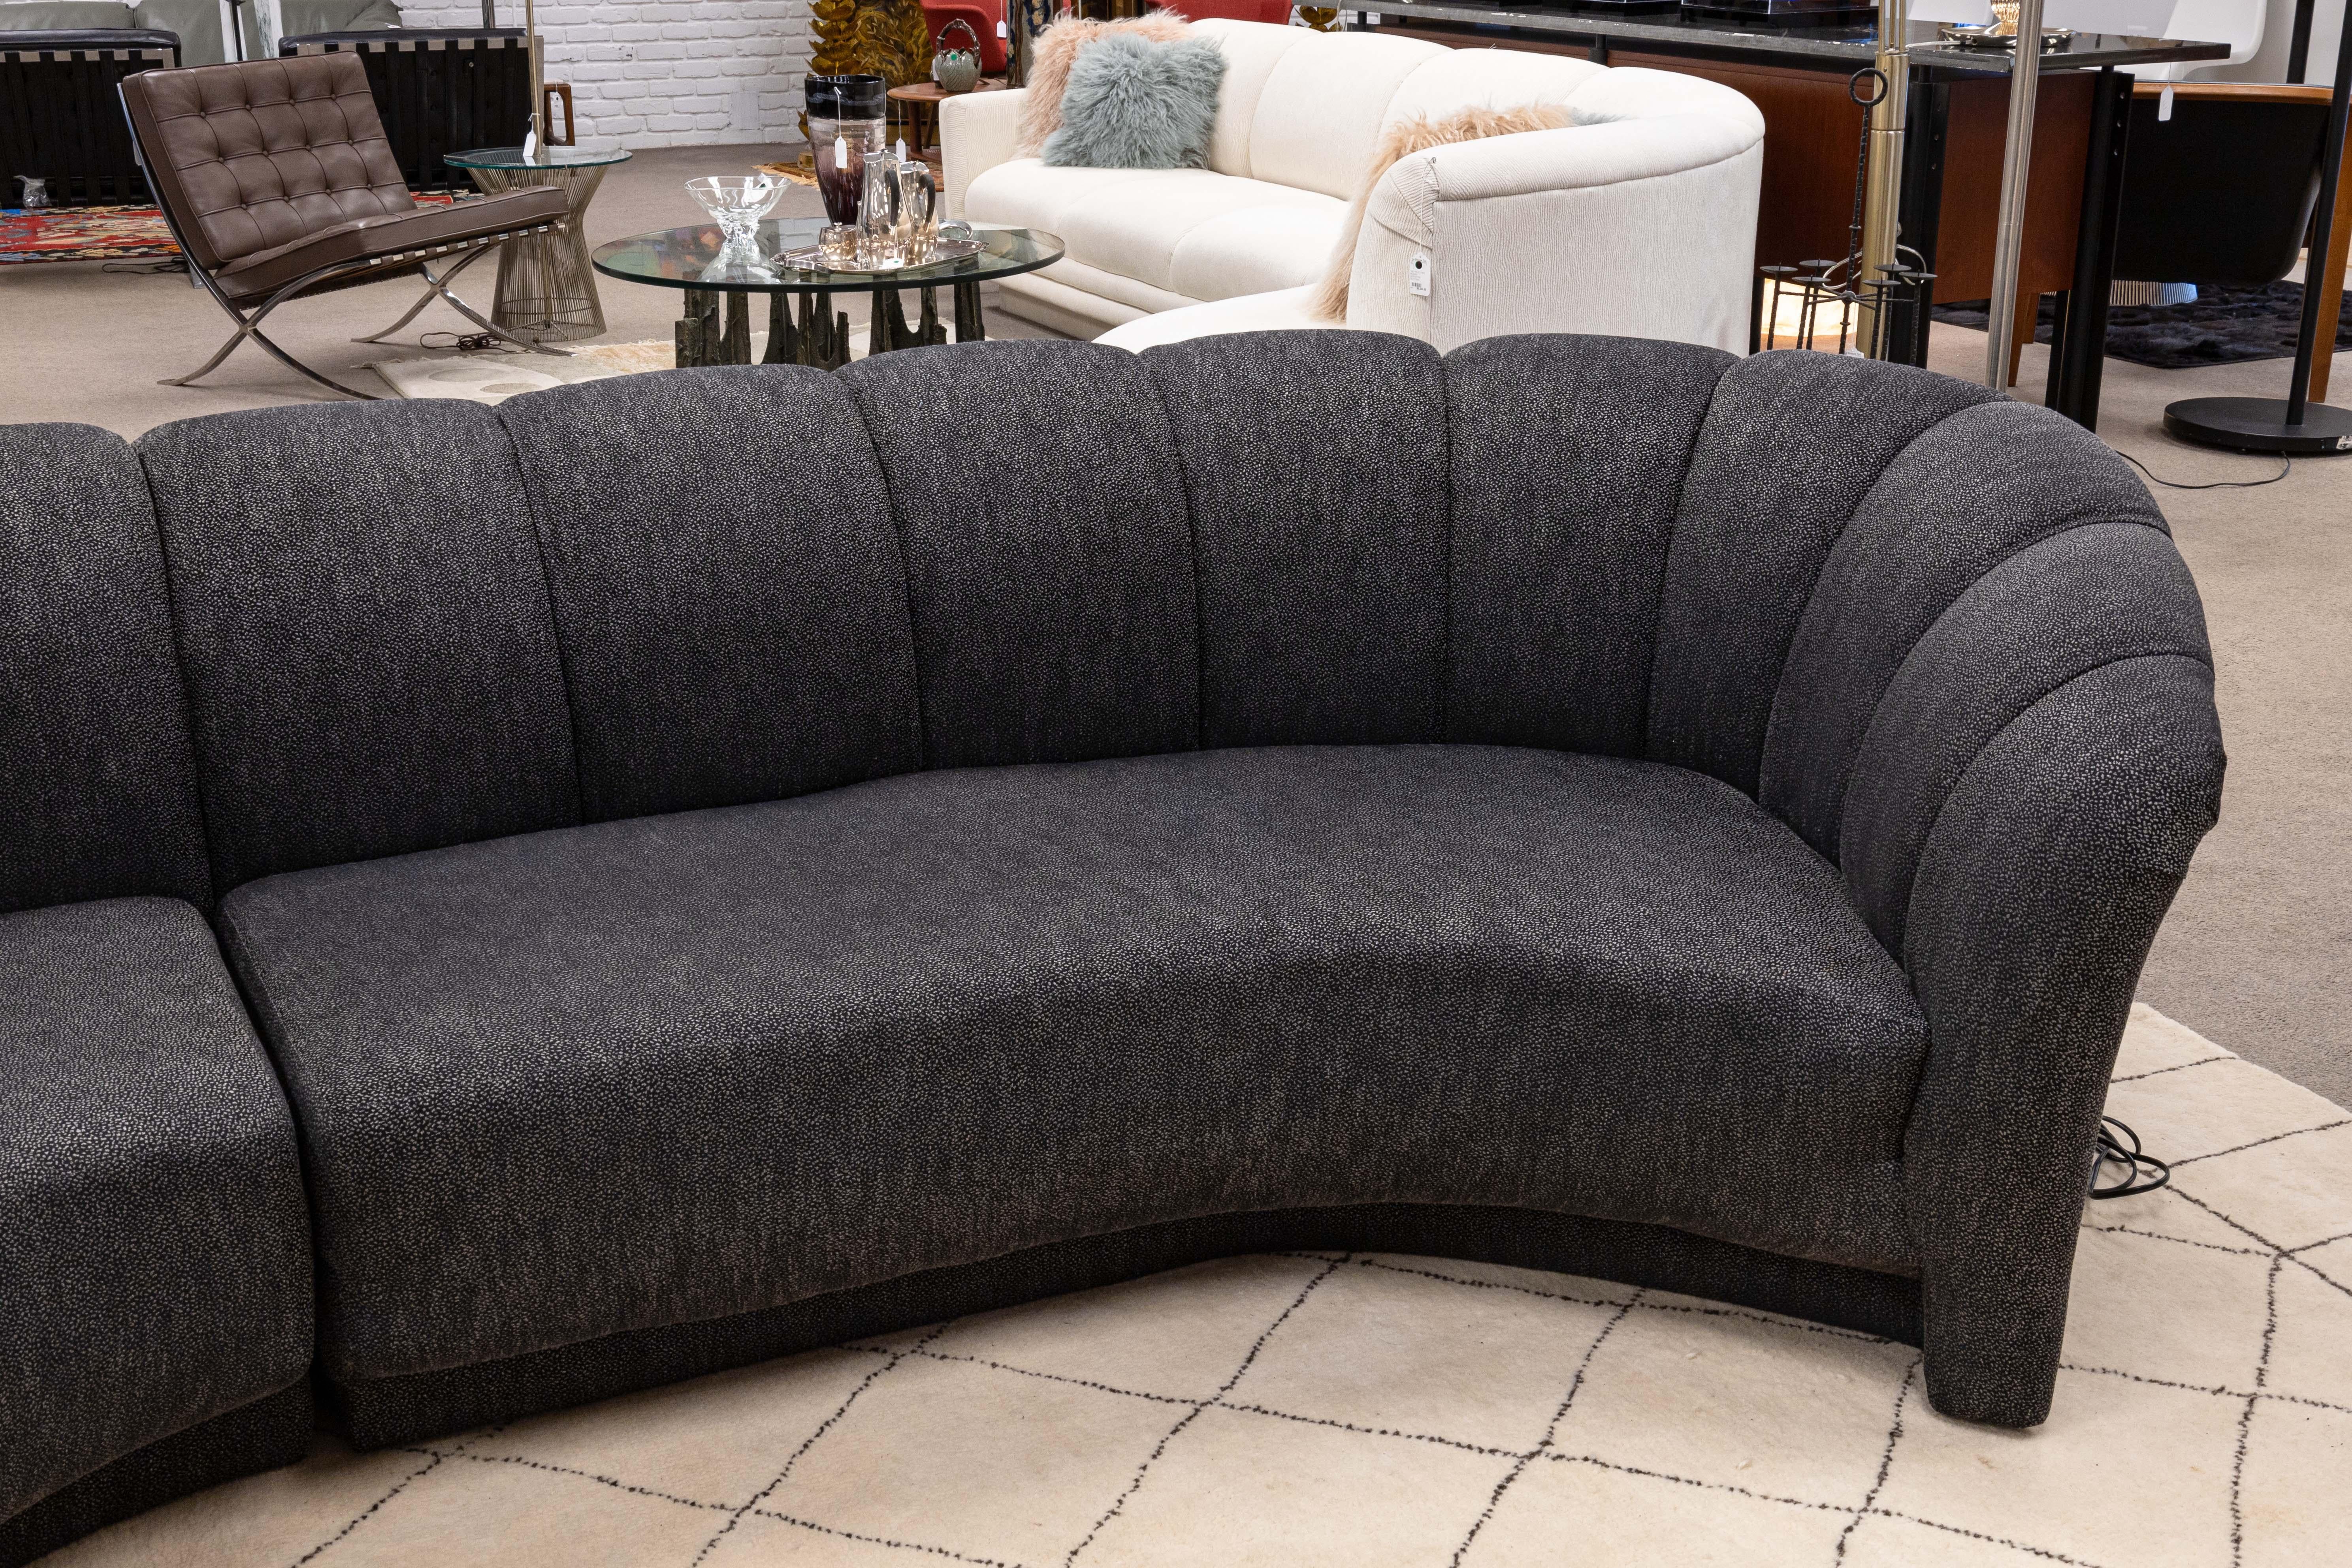 American Milo Baughman for Thayer Coggin Deep Grey Tufted 3pc Sectional Sofa with Chaise For Sale